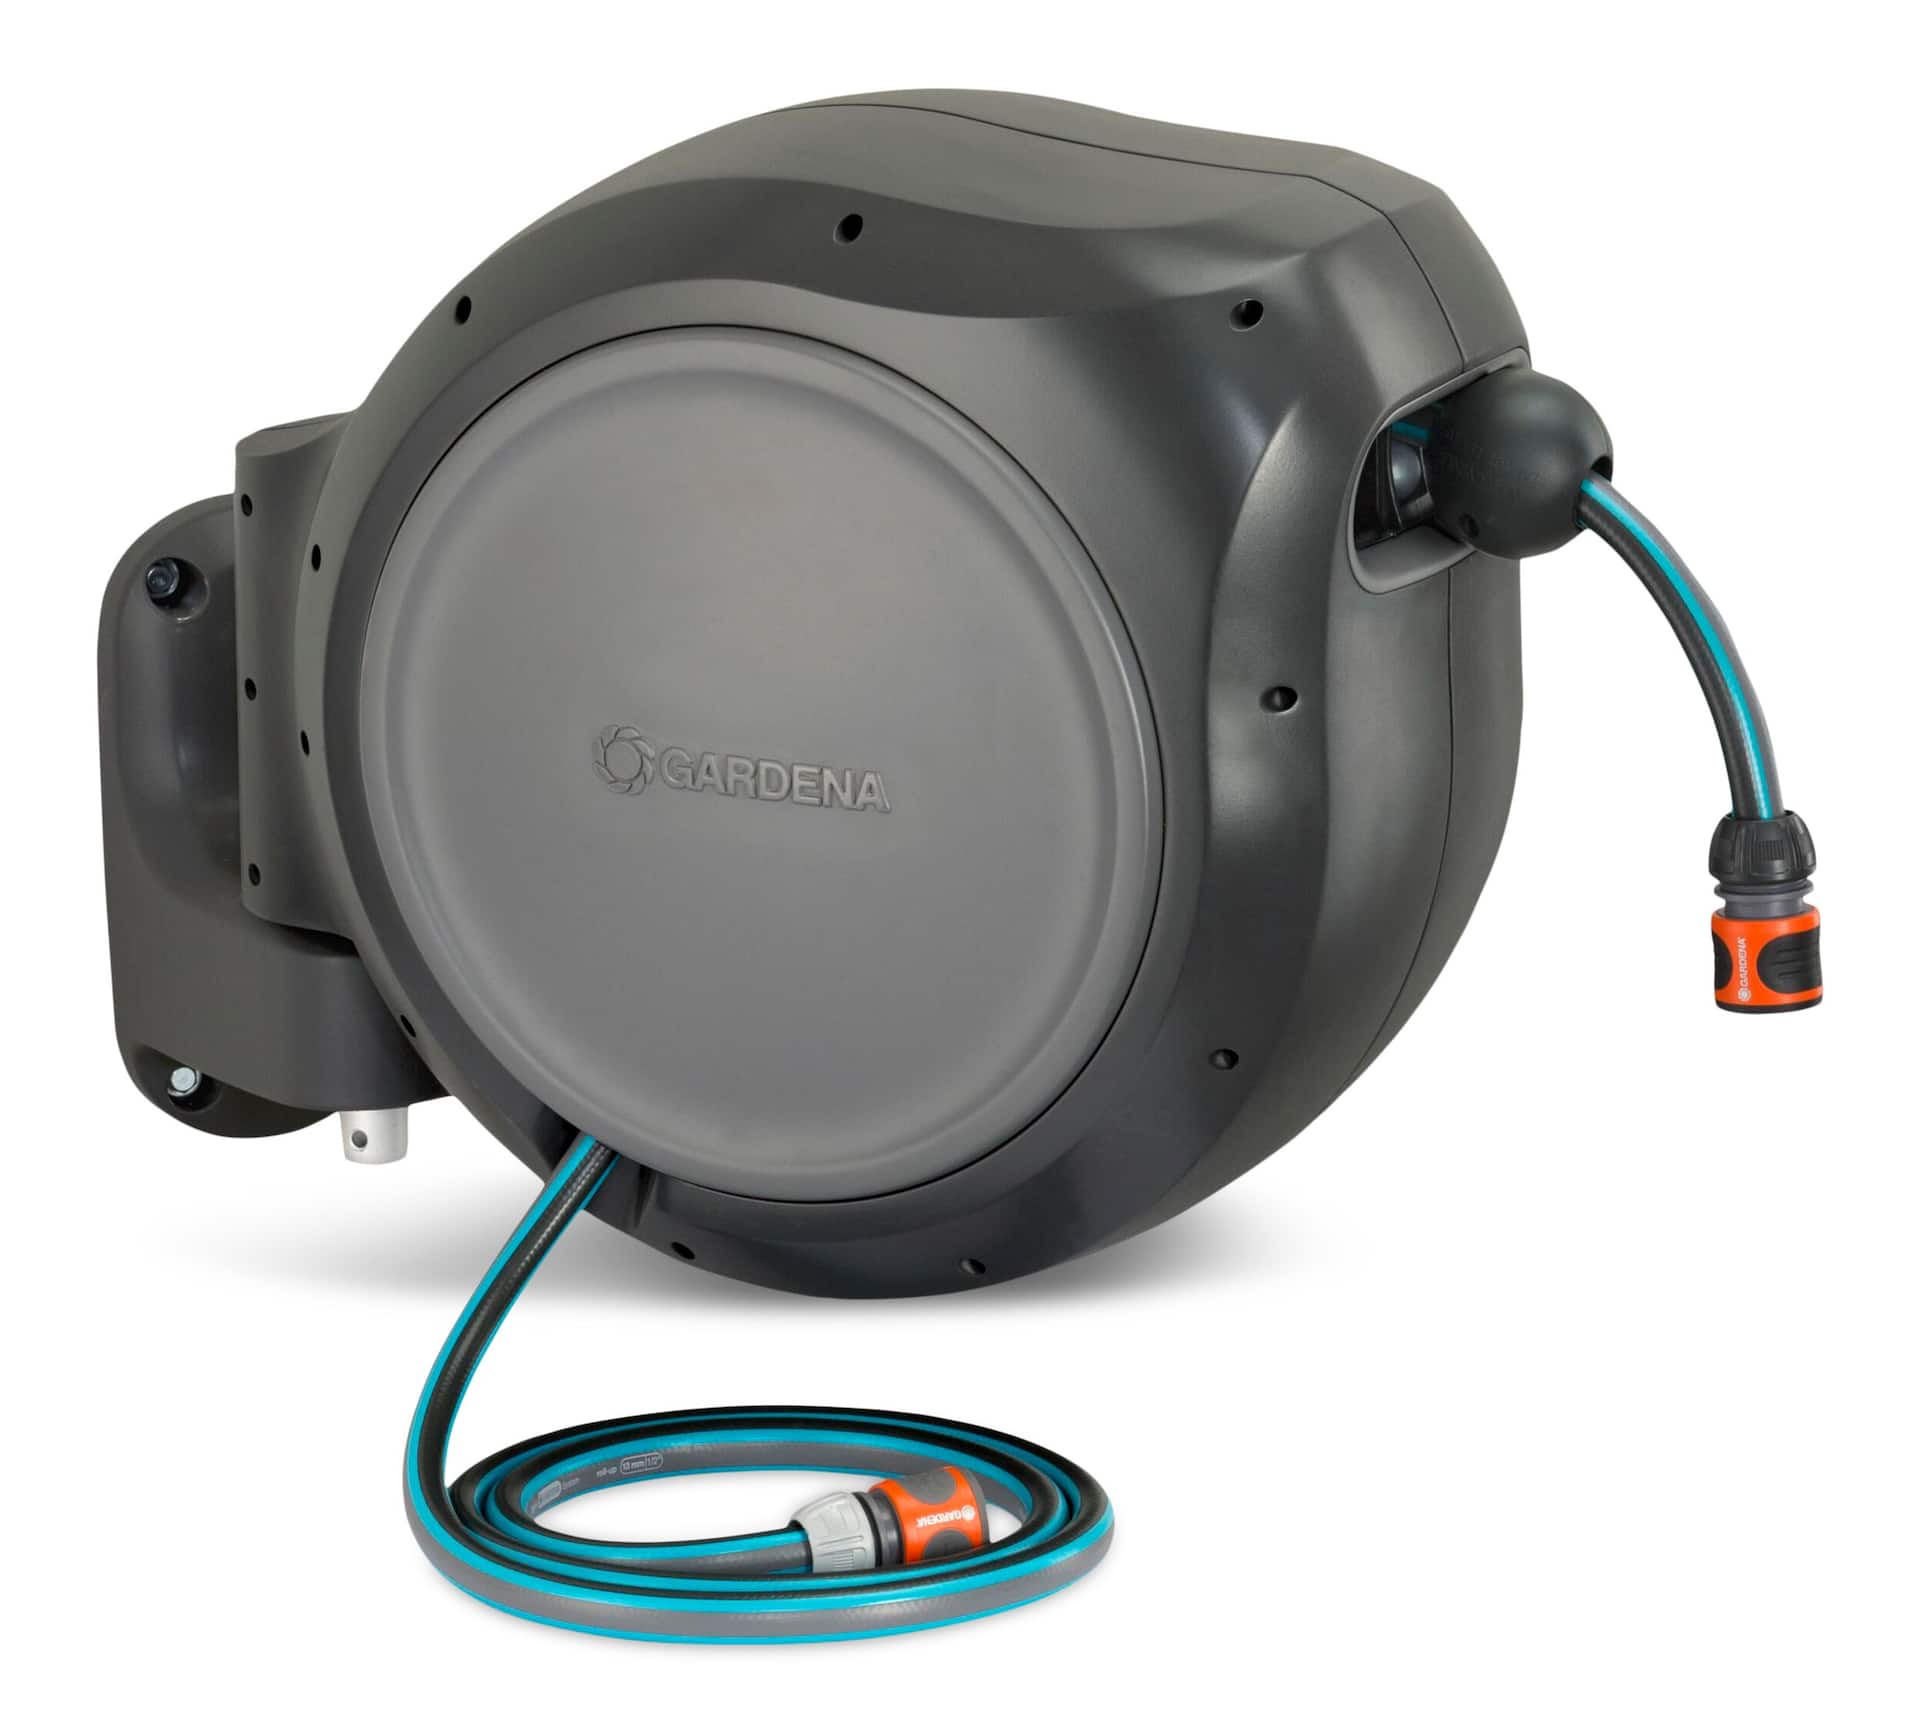 https://media-www.canadiantire.ca/product/seasonal-gardening/outdoor-tools/watering/1592043/gardena-wall-mounted-auto-hose-reel-with-nozzle-100-ft-0a8f529d-8648-422e-b455-97c64ae36bfa-jpgrendition.jpg